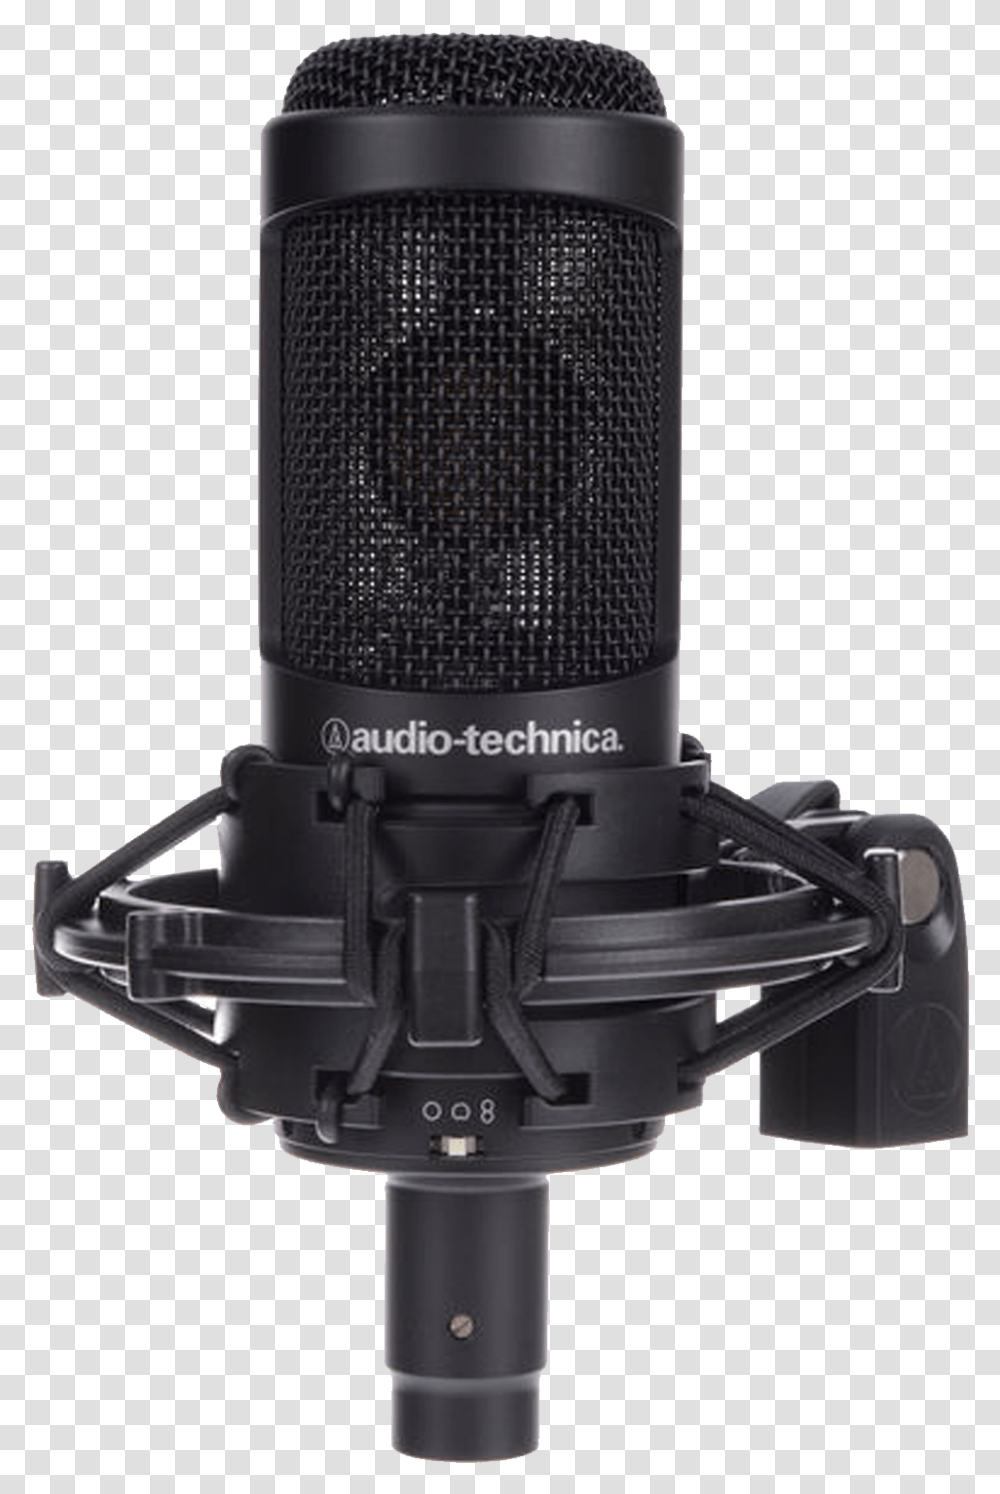 Audio Technica, Electrical Device, Microphone, Mixer, Appliance Transparent Png